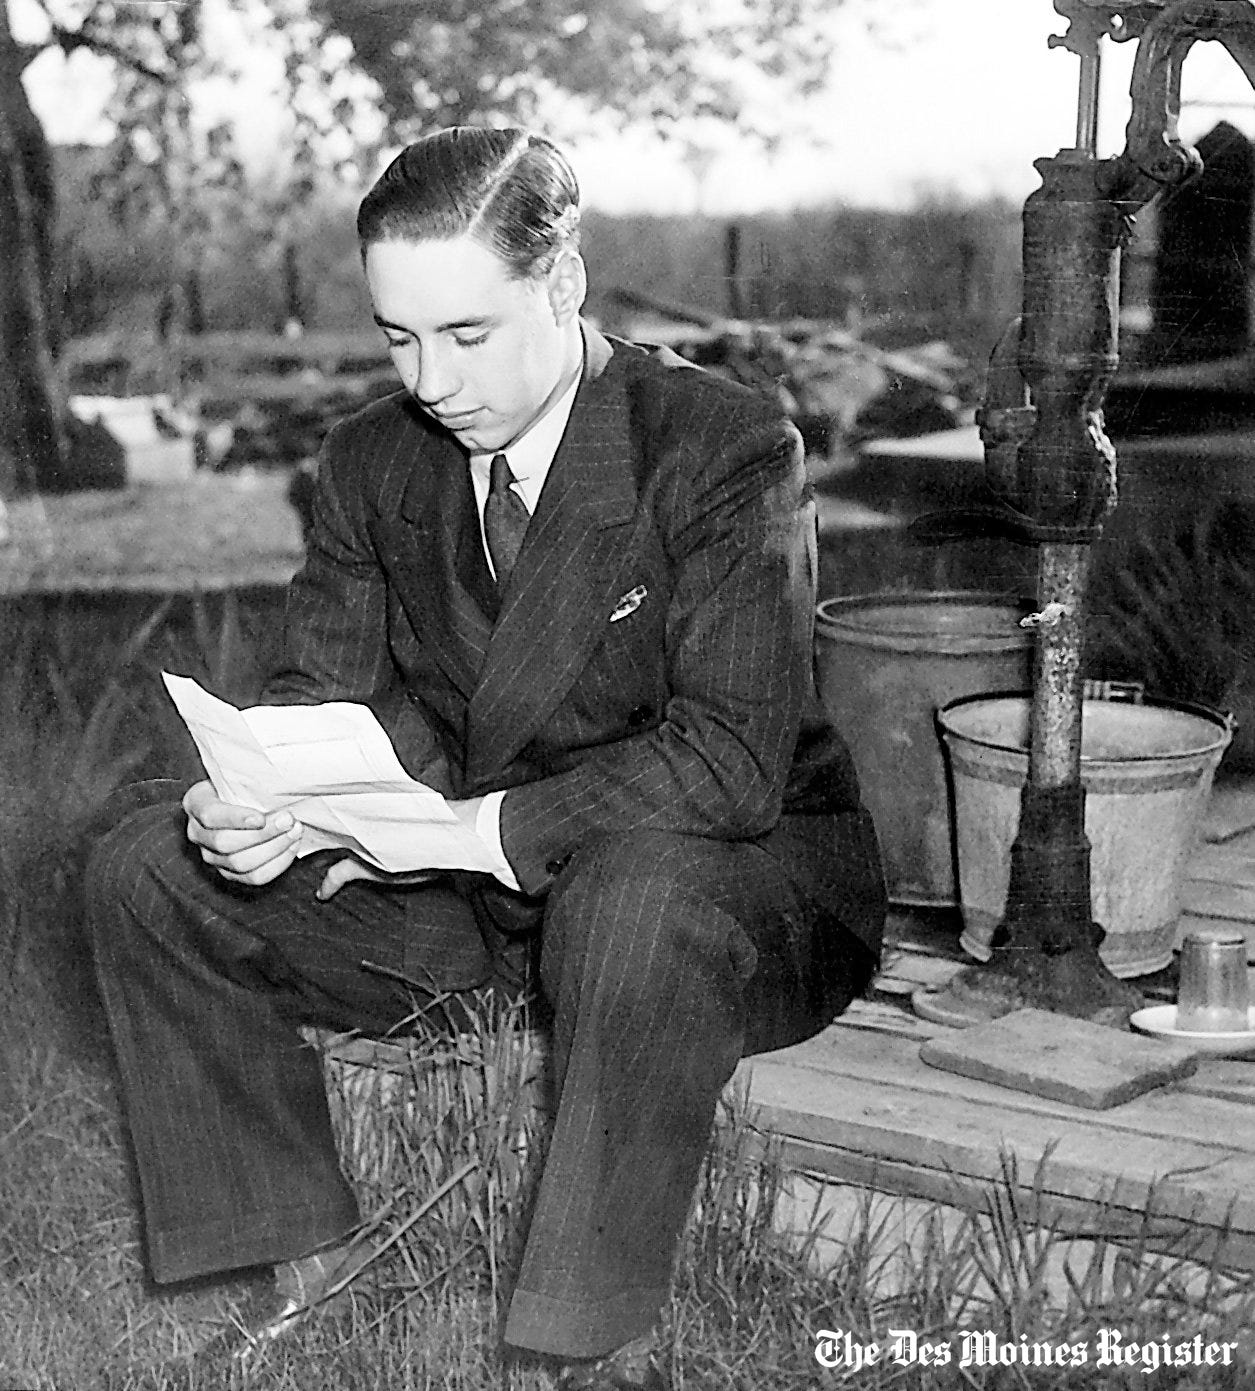 From May 1937: Bob Feller takes time out before his graduation ceremony to rehearse his speech outside his parents' home in Van Meter.